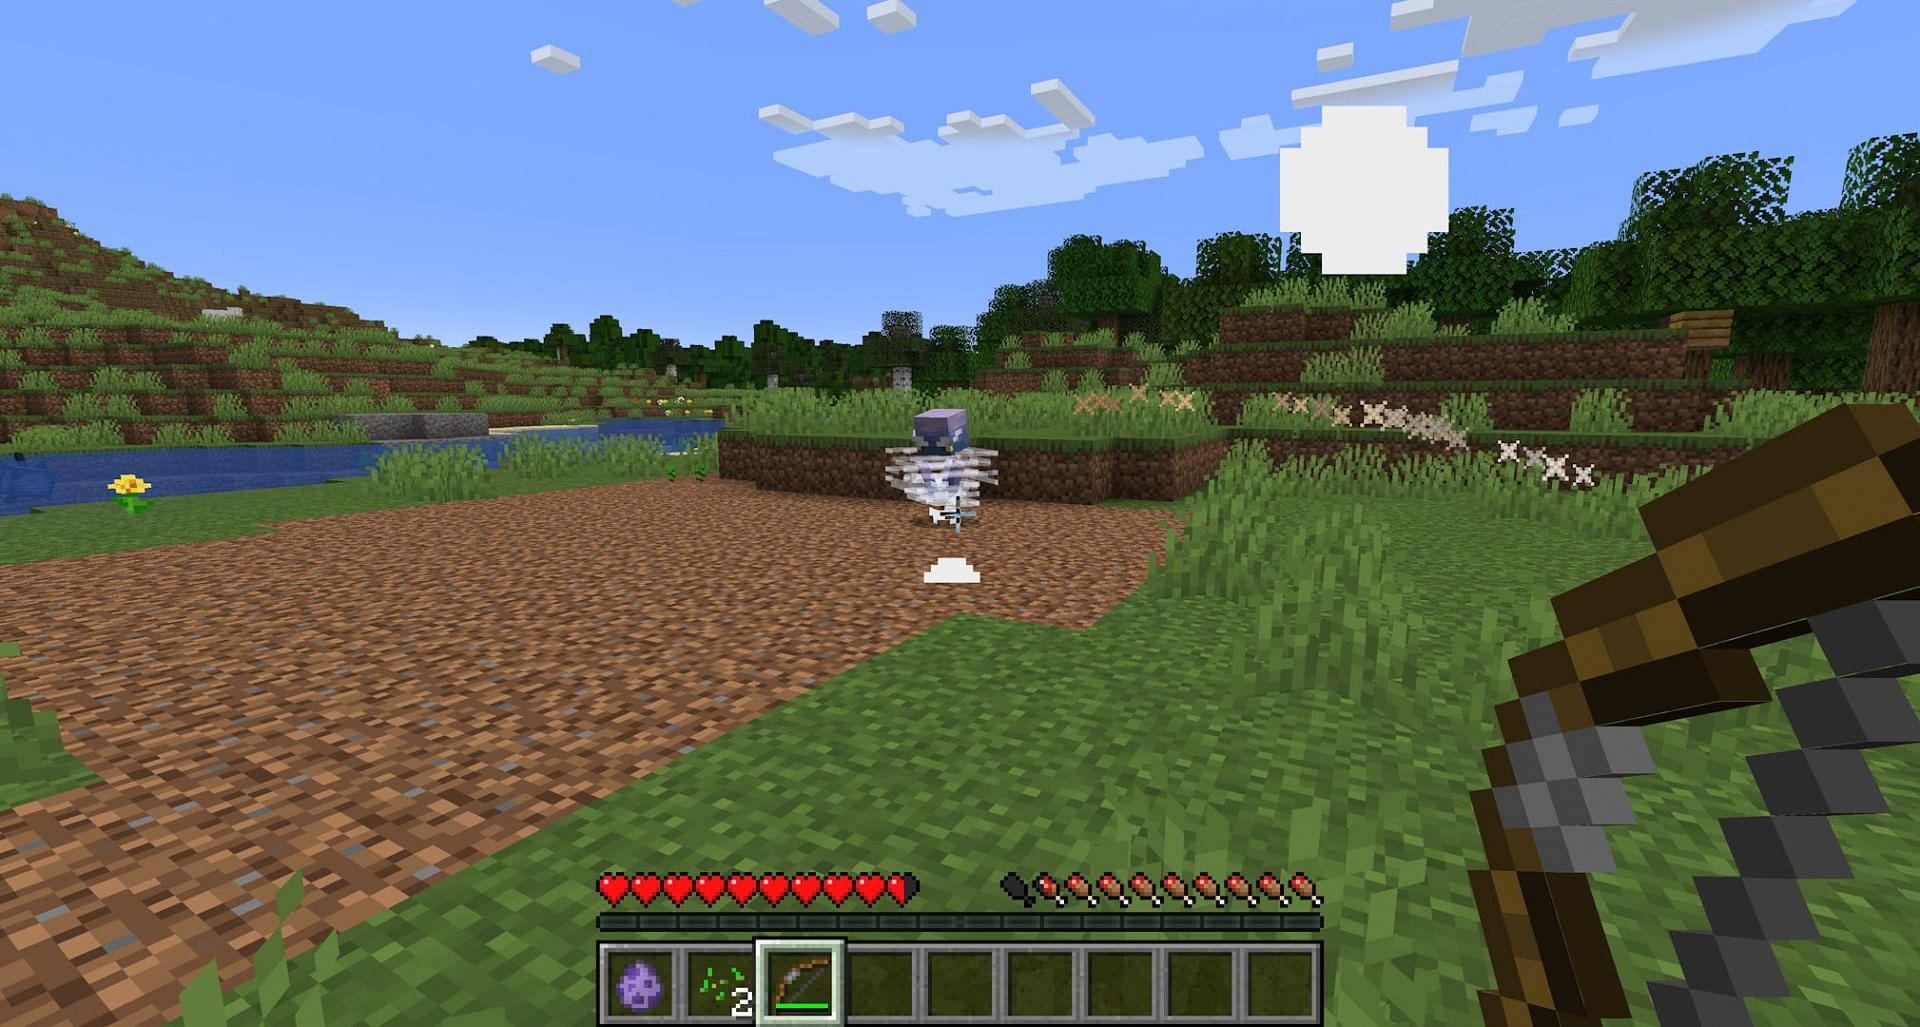 Breeze are not much threat damage-wise, even to unarmored players (Image via Mojang)